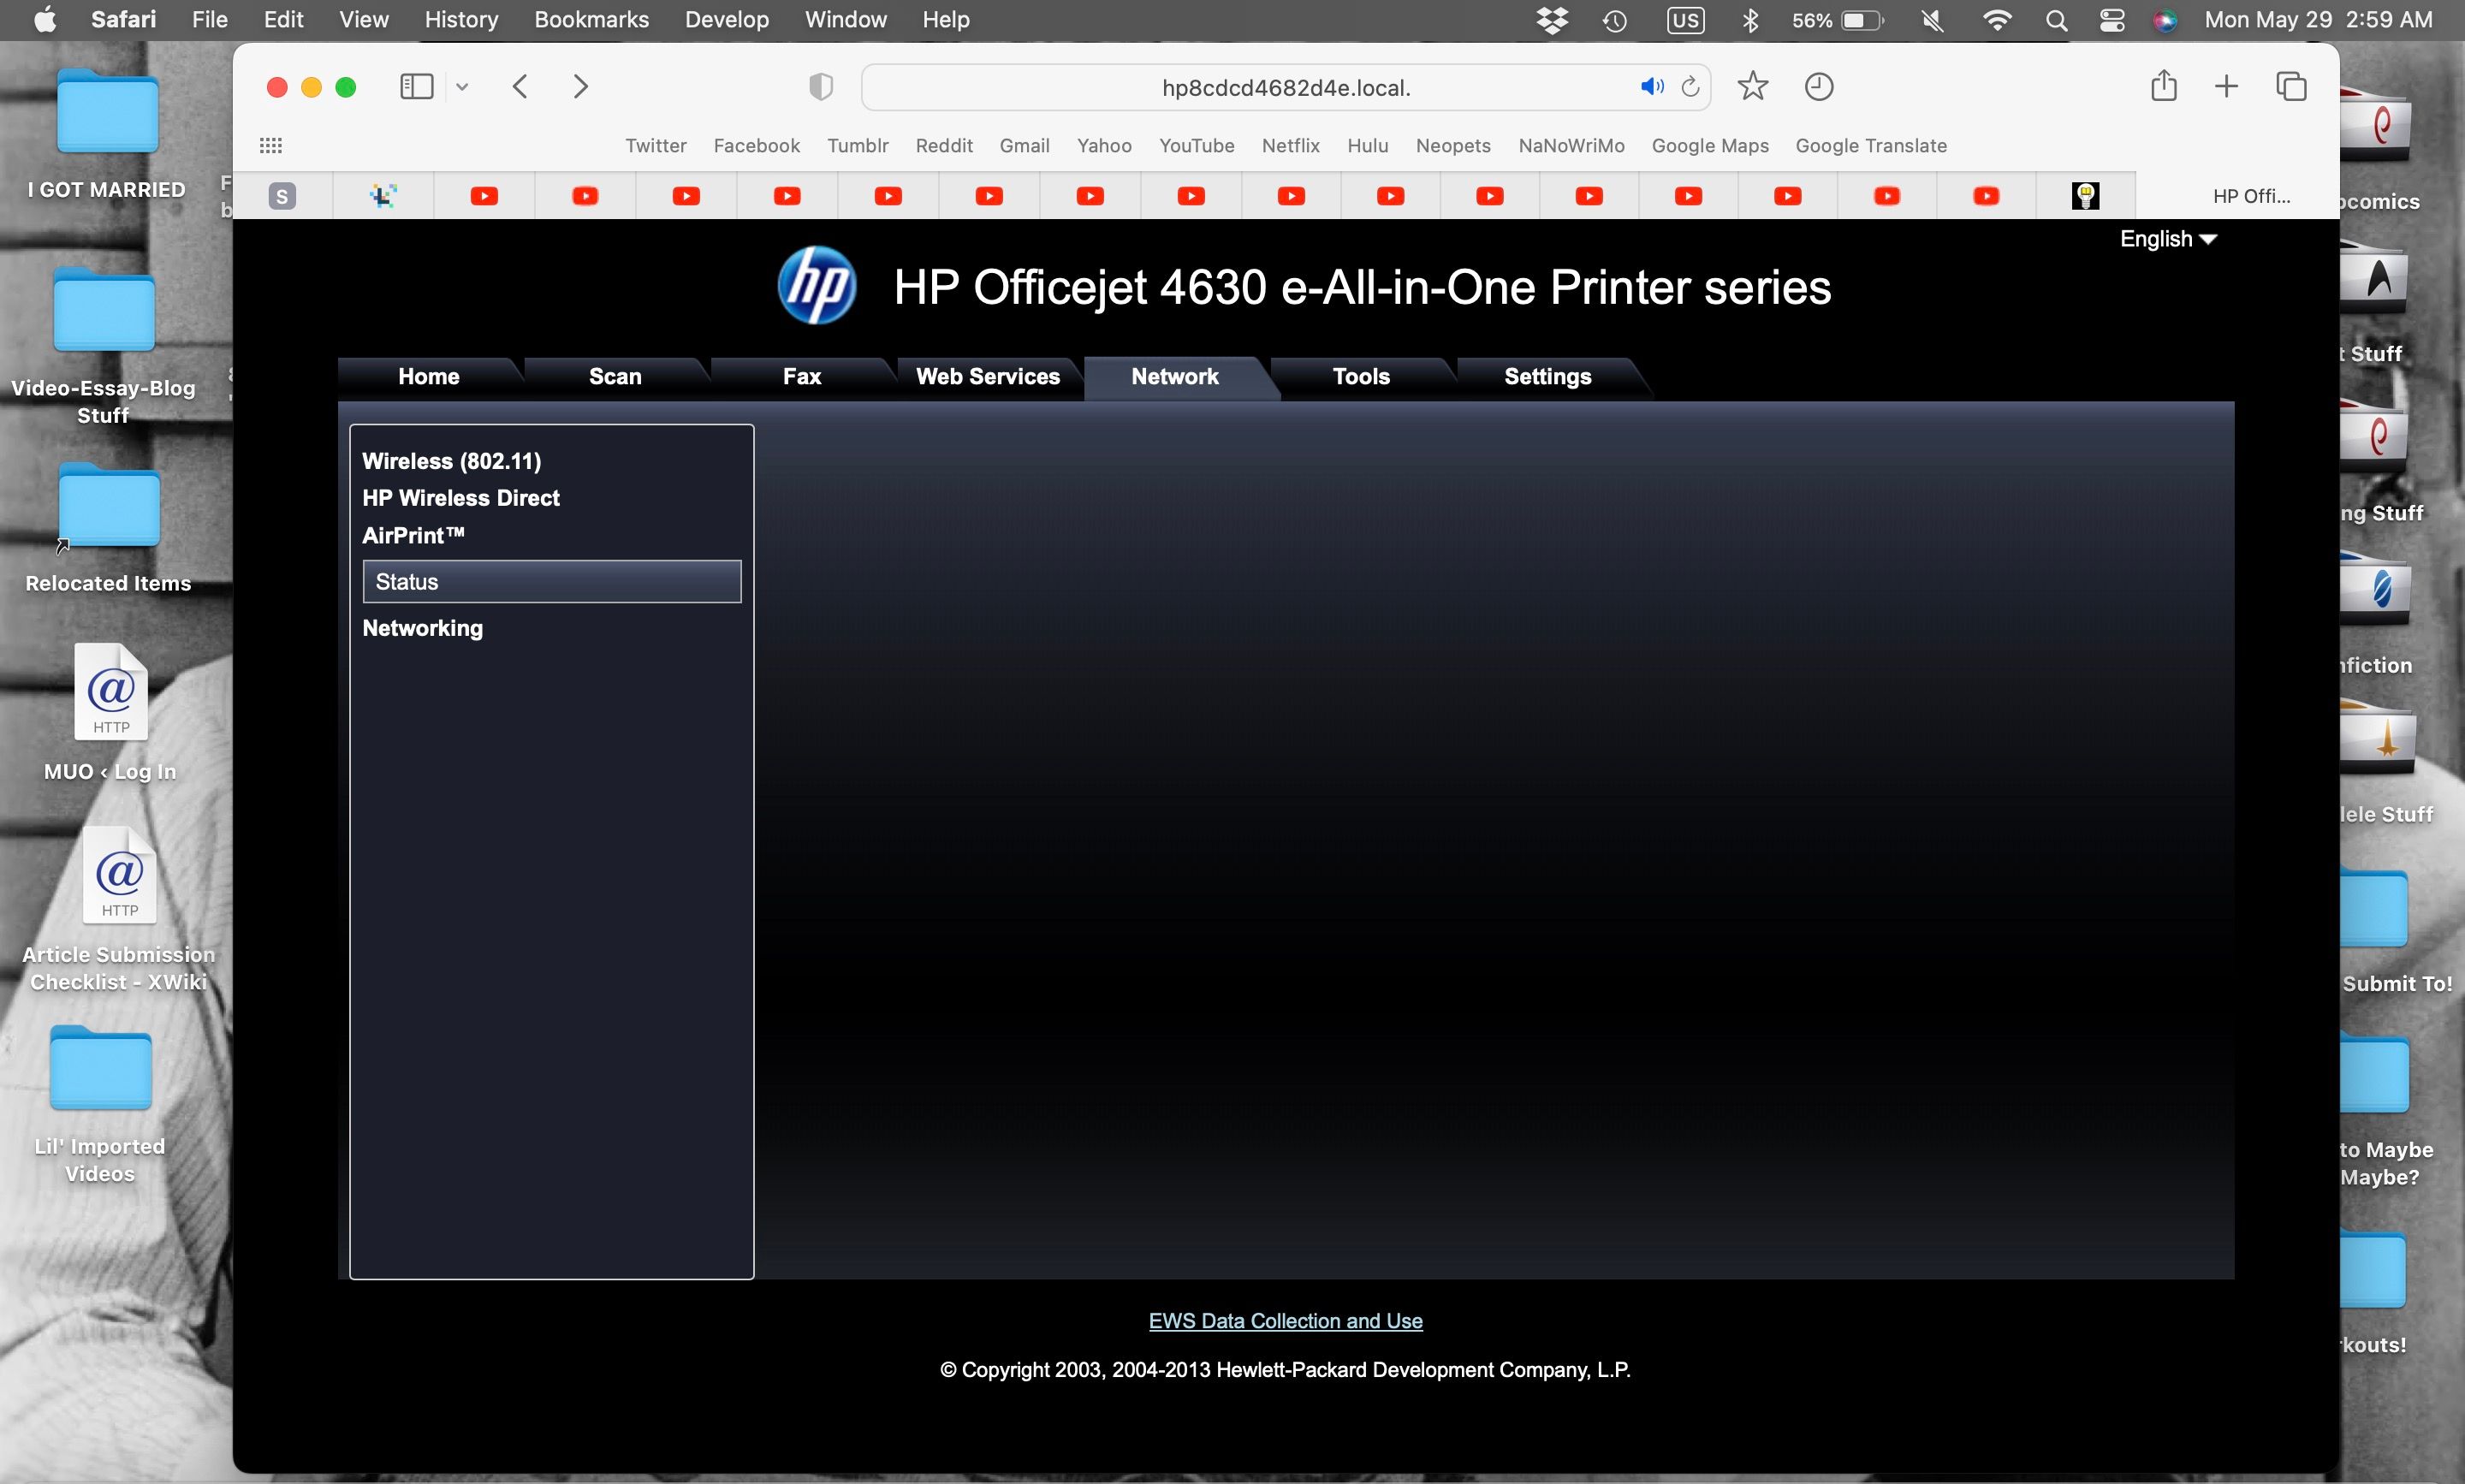 Printer settings webpage open with Airprint option visible